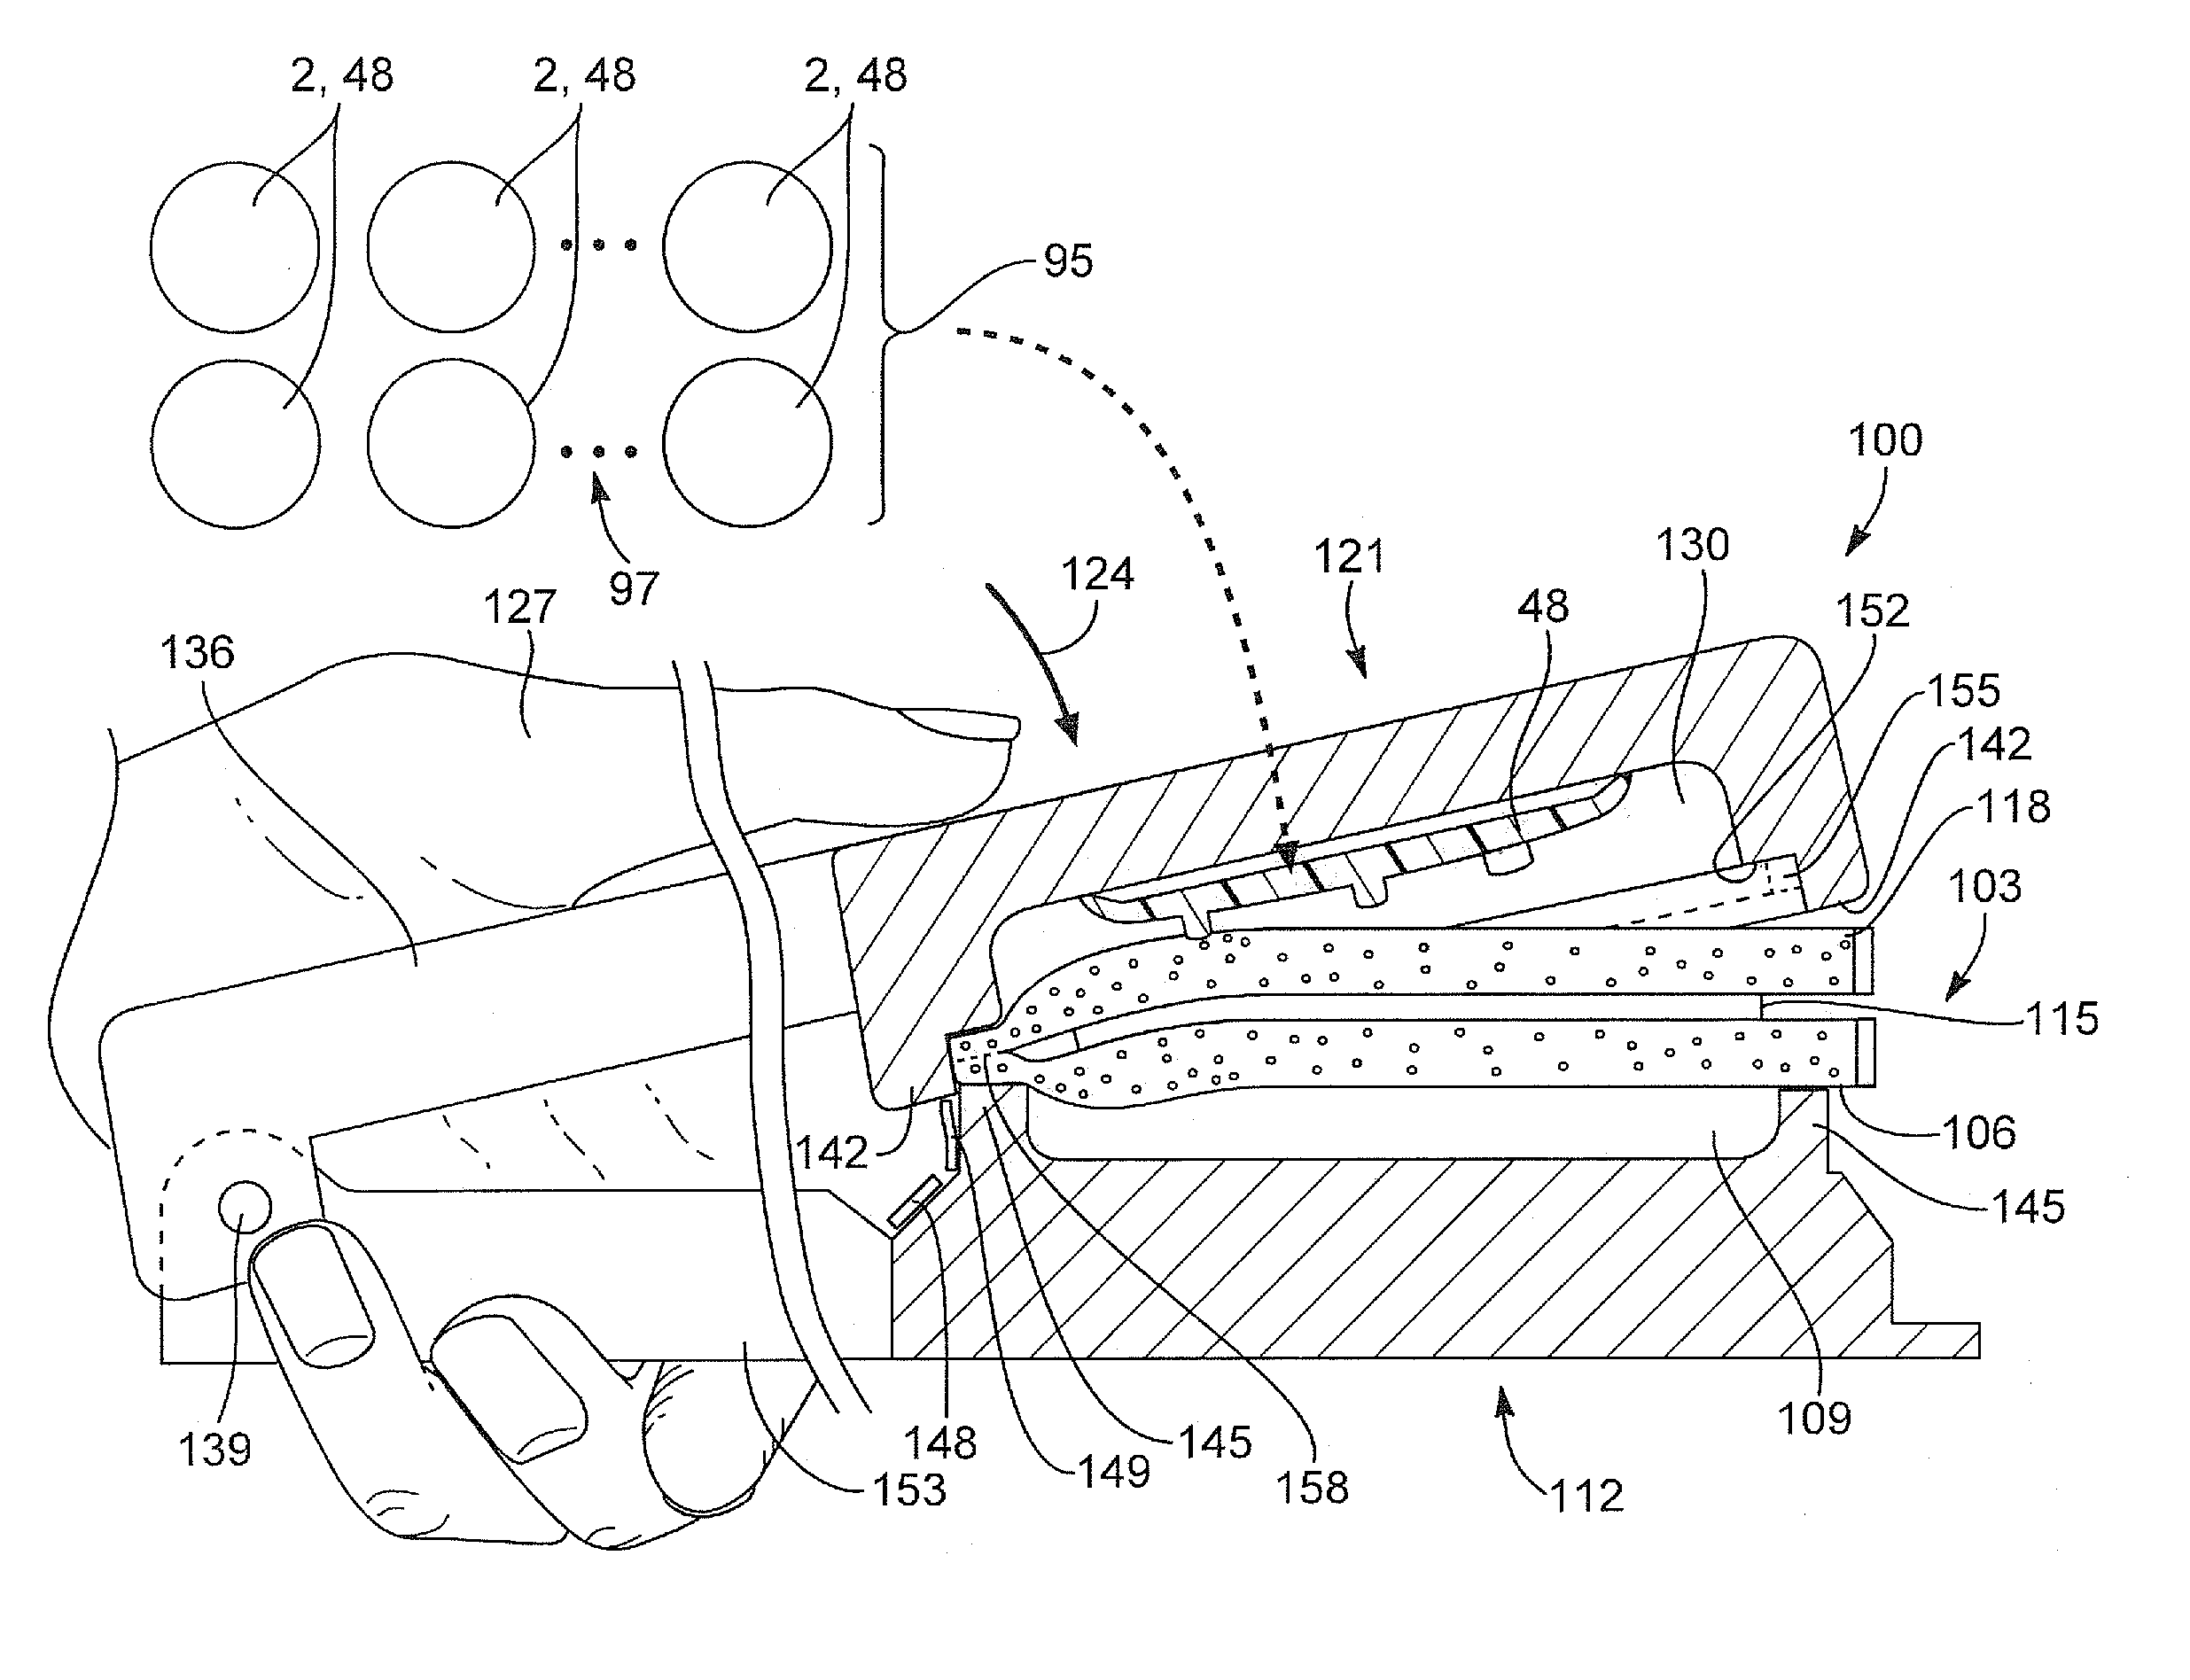 Apparatus, system, and method for a bread cutter and impression devices